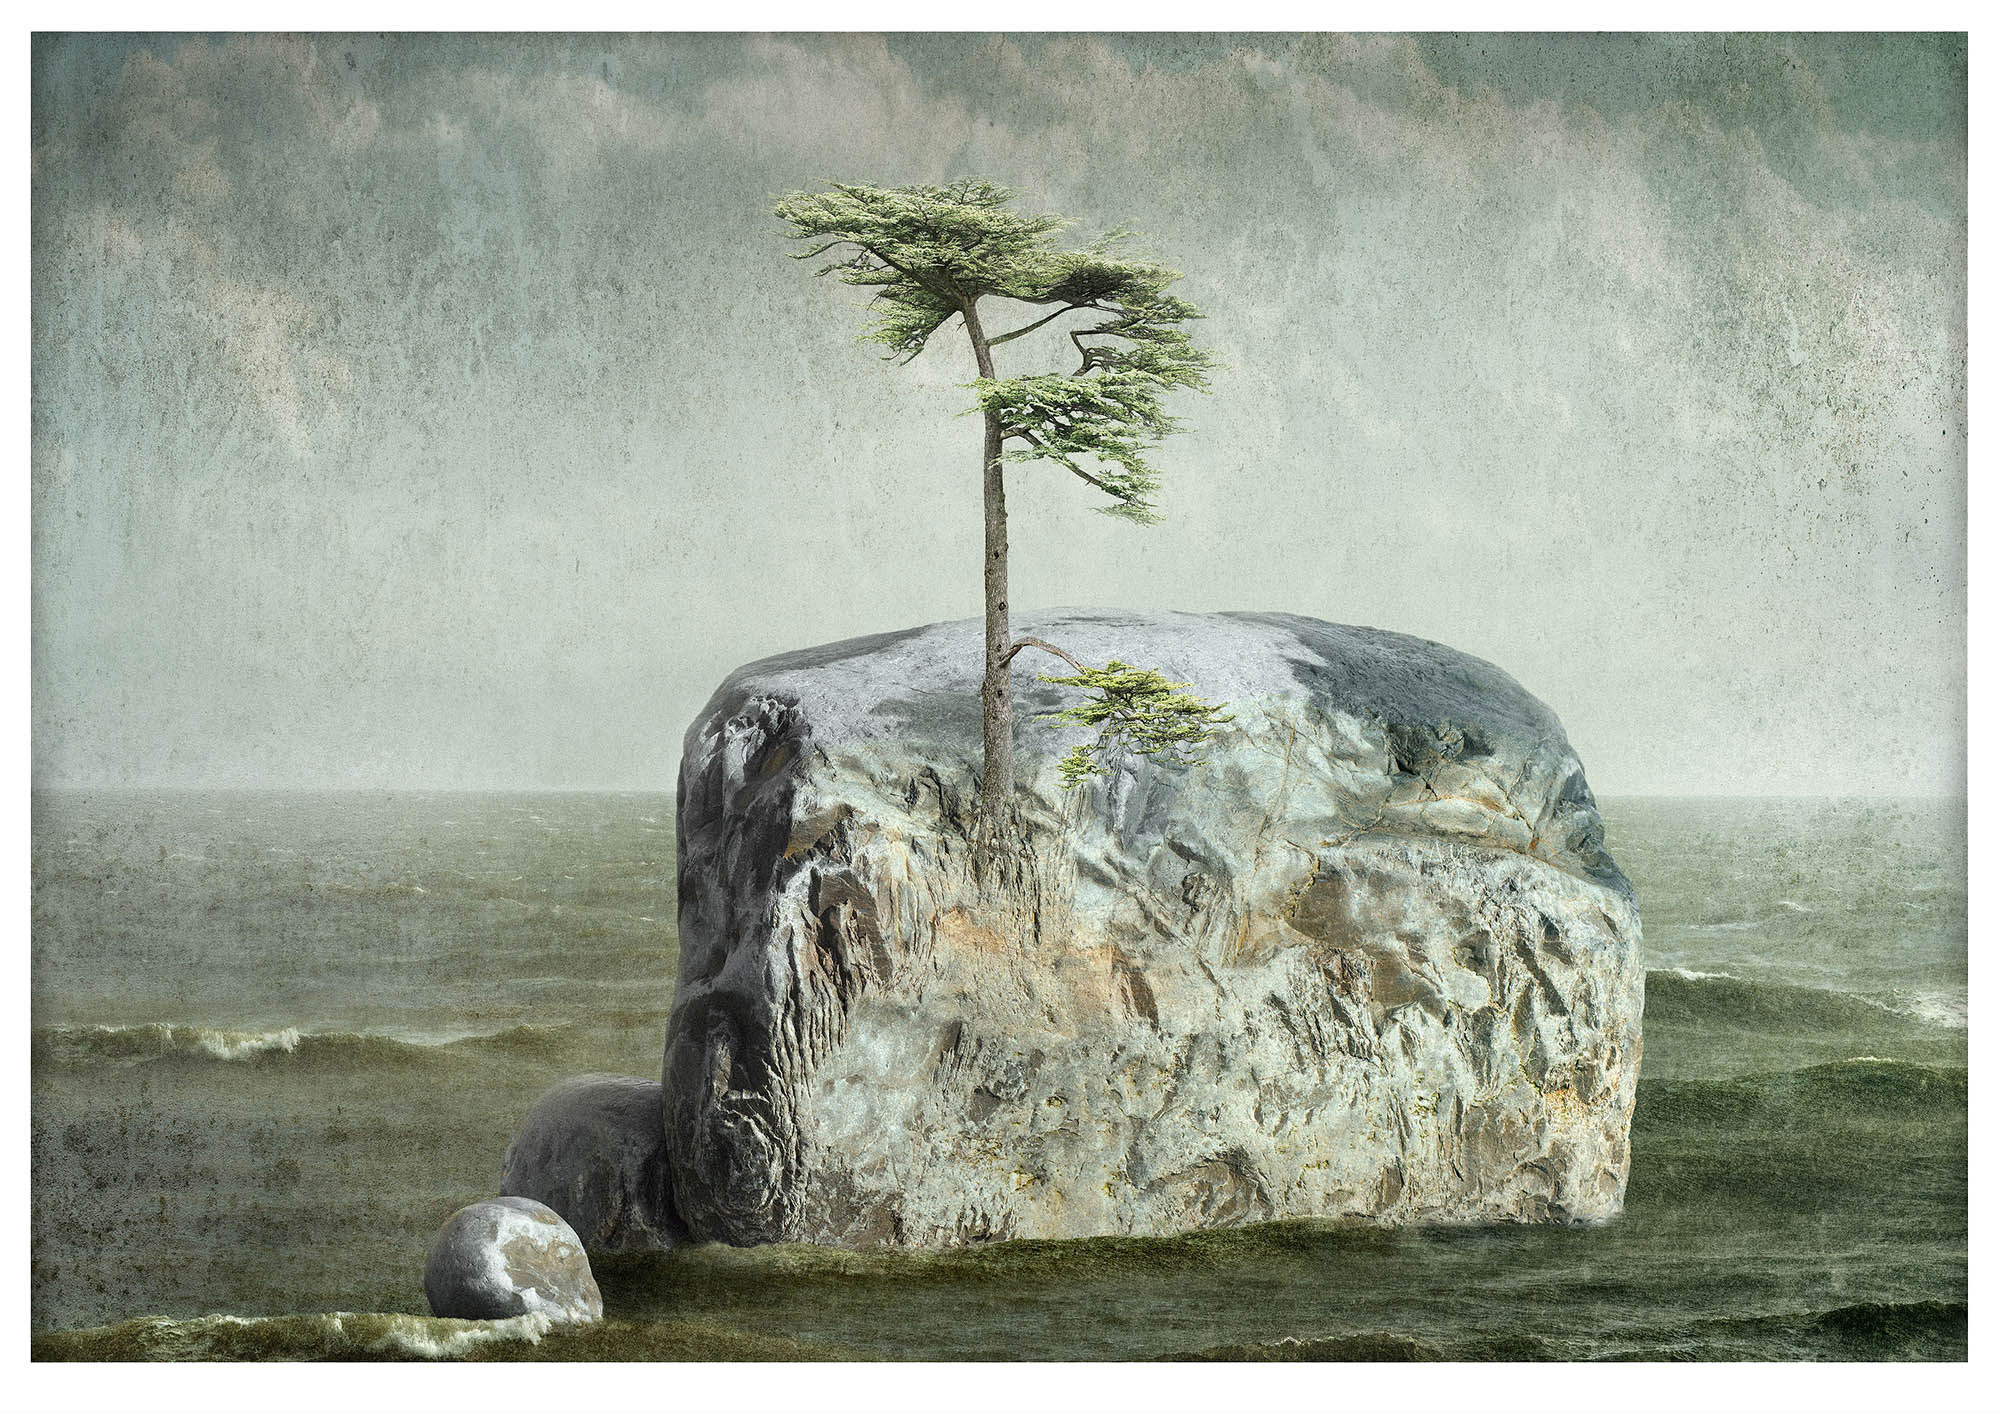 Monotoned illustrative fantasy composite photograph with one small islands with one pine tree in middle of a sea